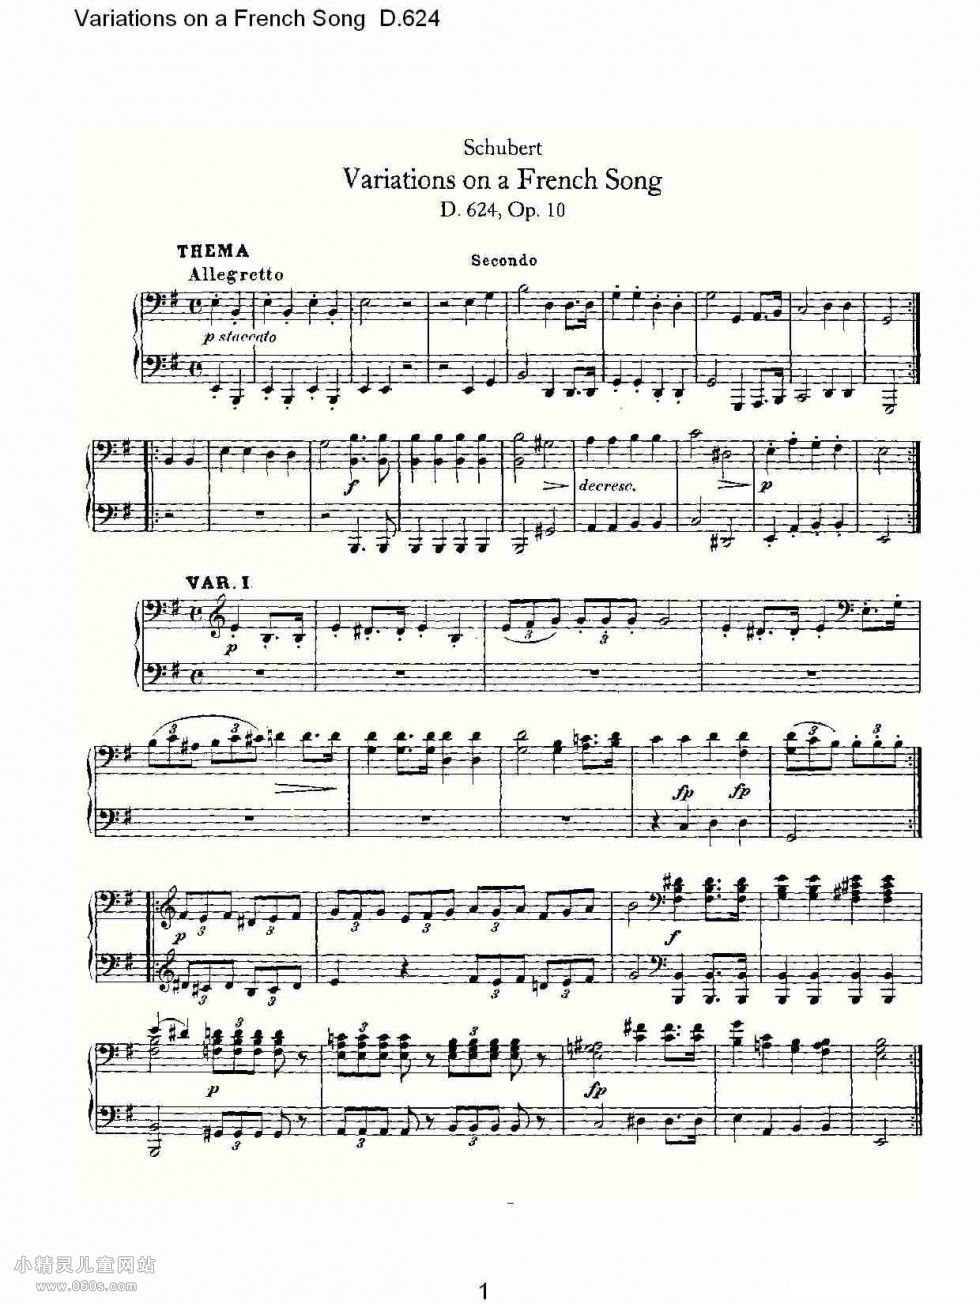 Variations on a French Song D.624 D.624